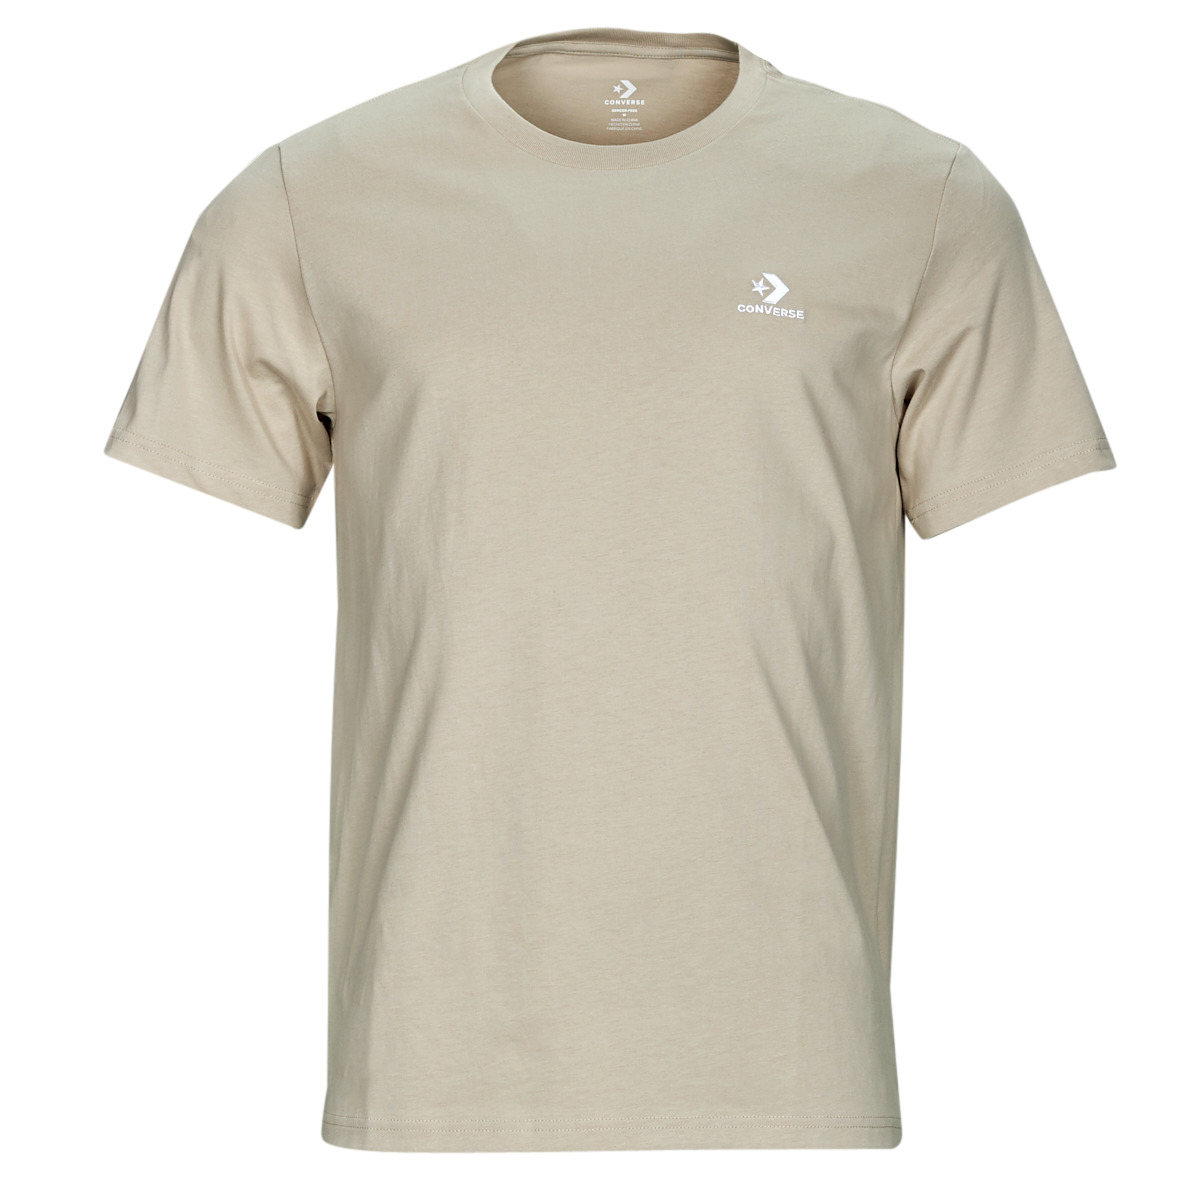 STAR ! GO-TO t-shirts CHEVRON delivery Clothing | short-sleeved Converse Europe - Men 22,40 EMBROIDERED Beige - € Fast TEE Spartoo